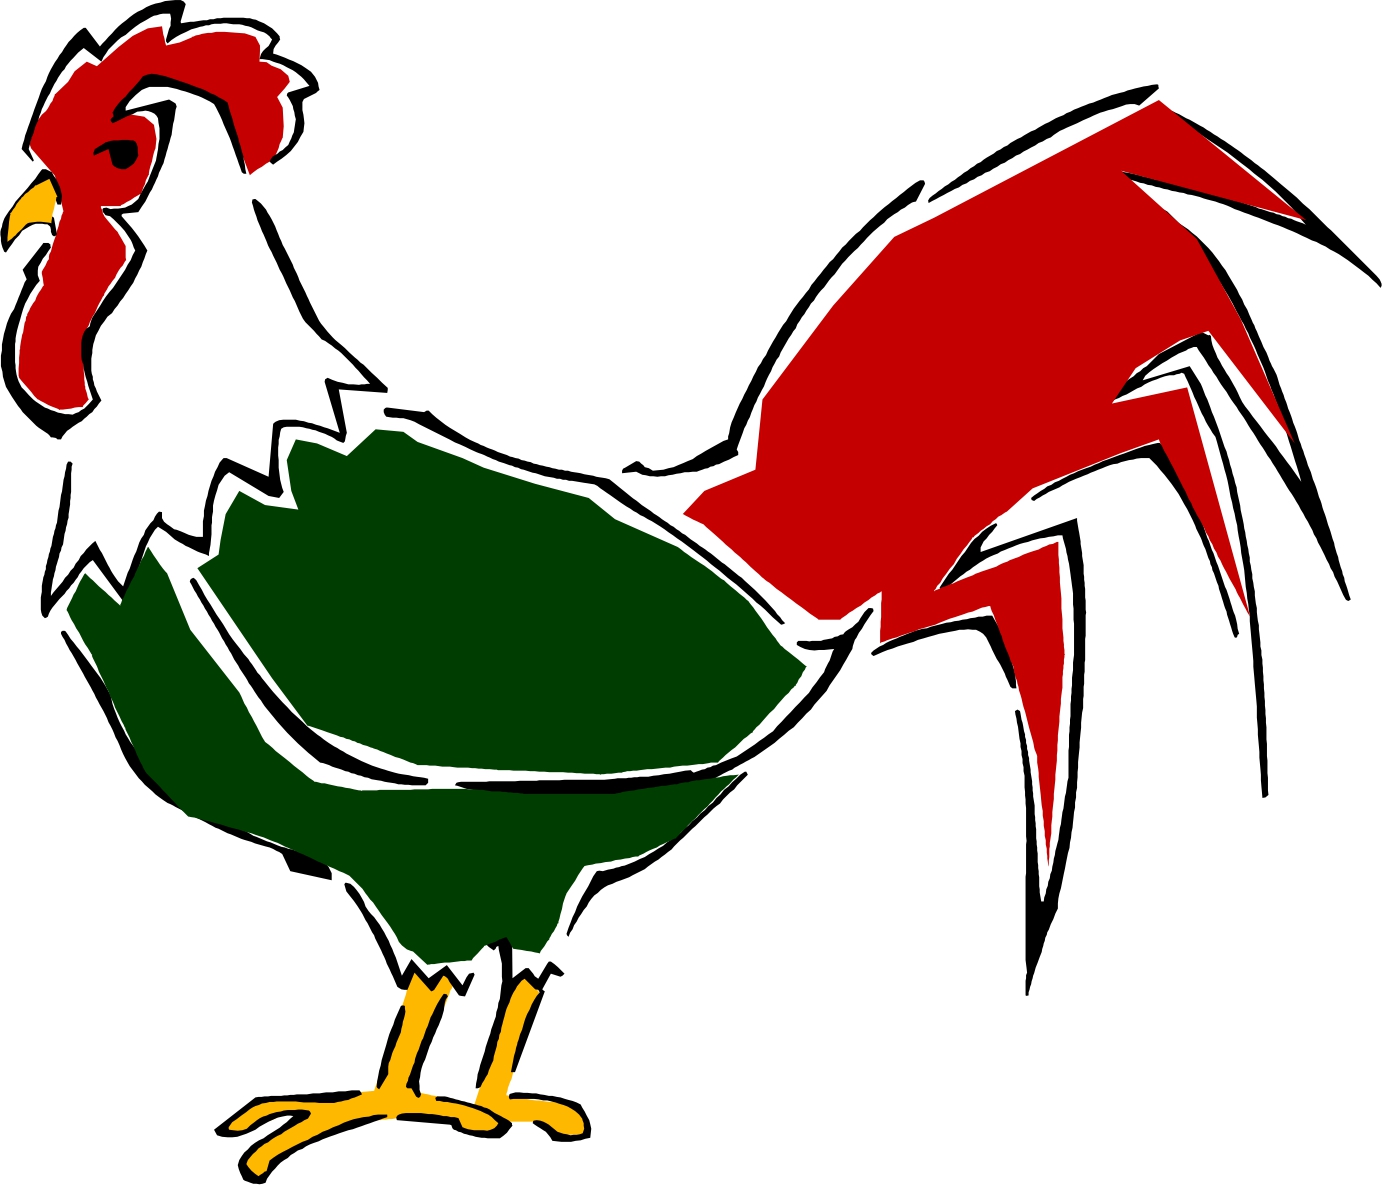 rooster animation clipart - photo #12